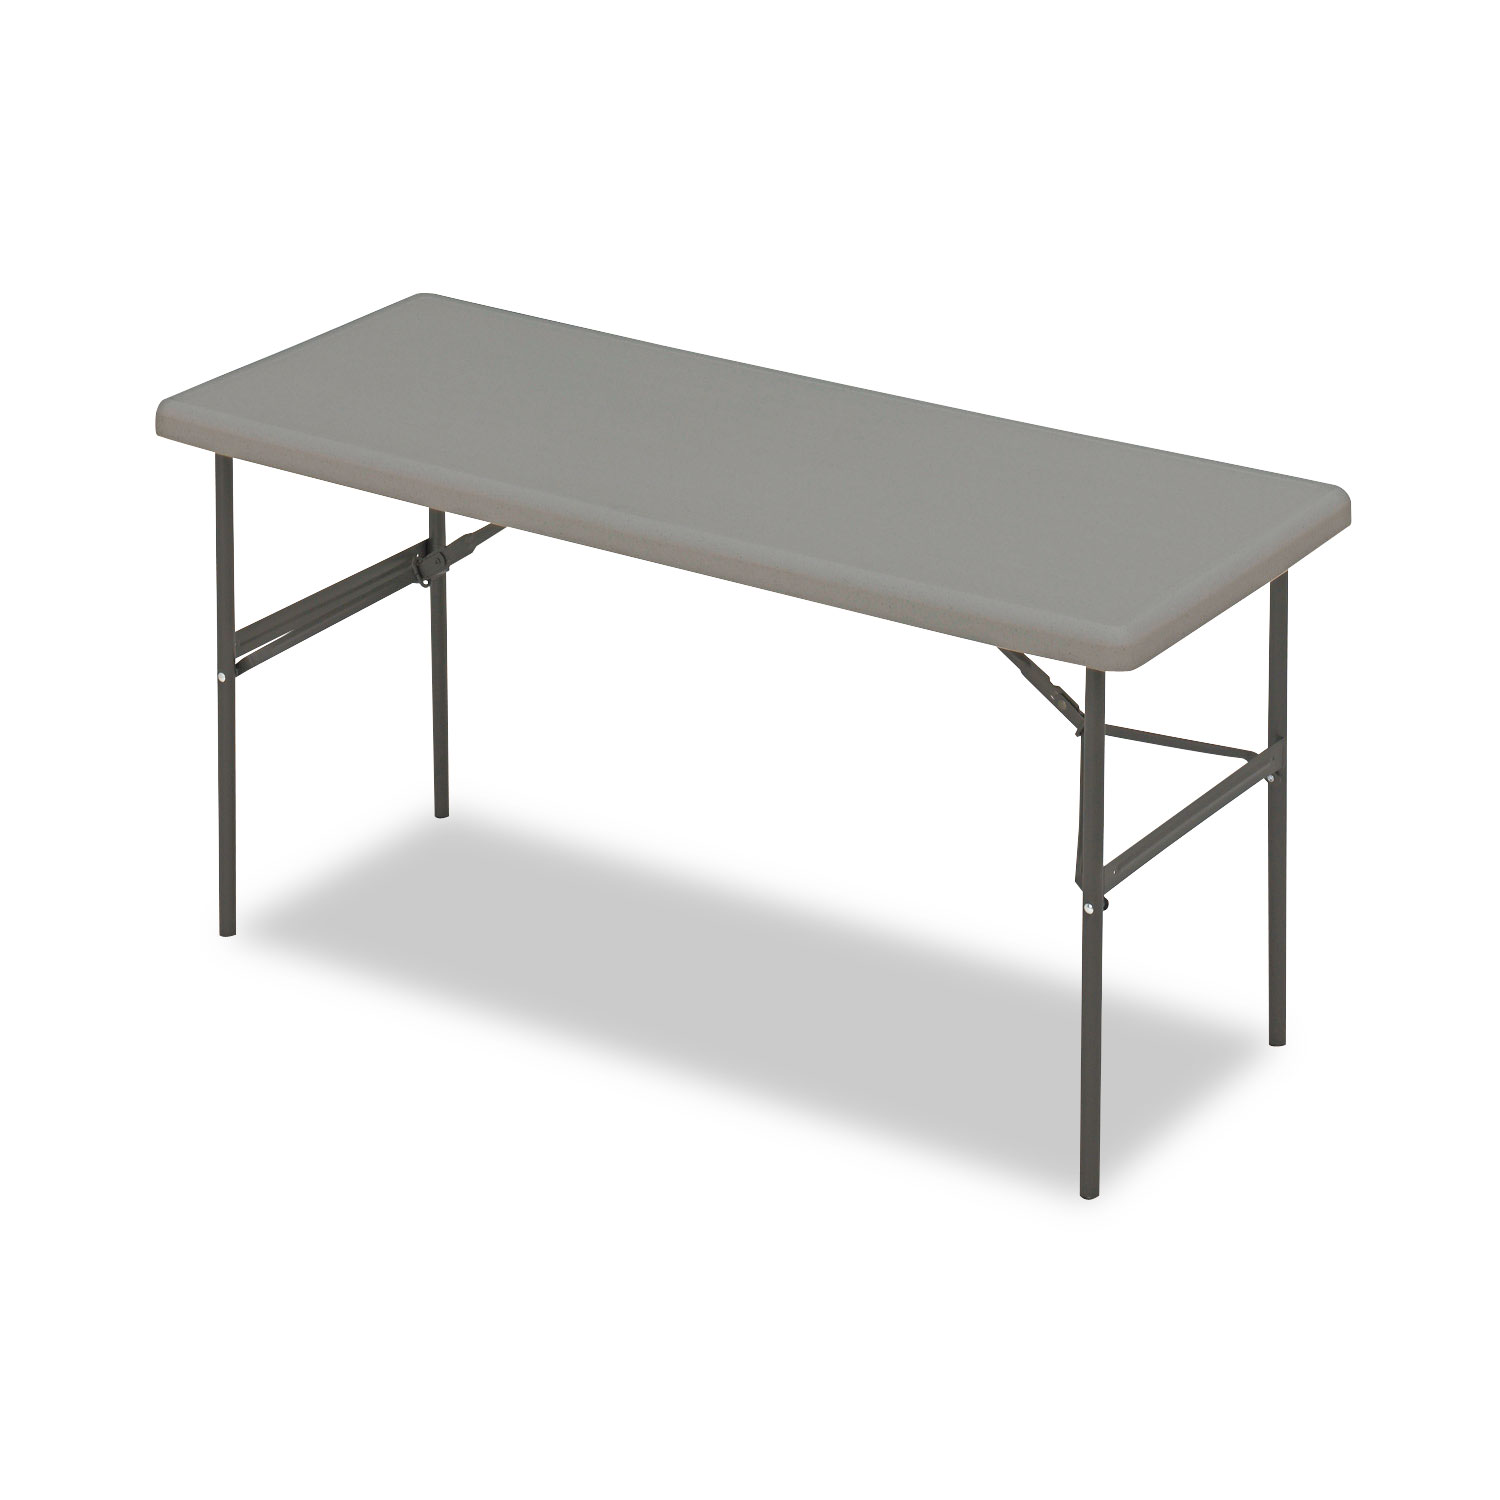 Iceberg ICE65377 IndestrucTables Too 1200 Series Resin Folding Table, 60w x 24d x 29h, Charcoal